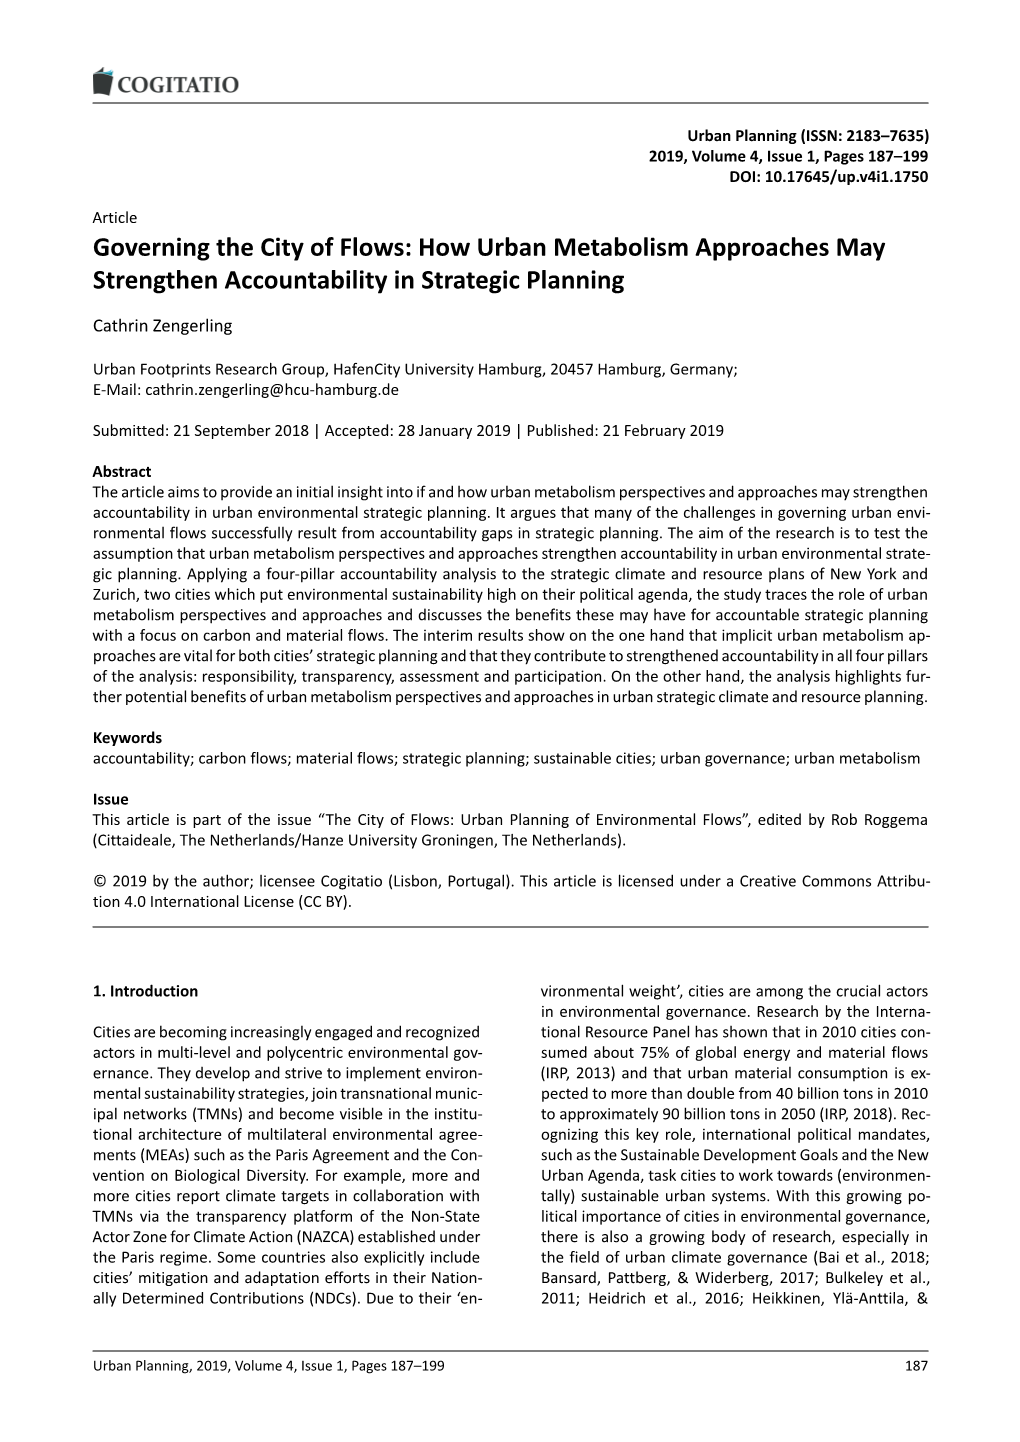 Governing the City of Flows: How Urban Metabolism Approaches May Strengthen Accountability in Strategic Planning